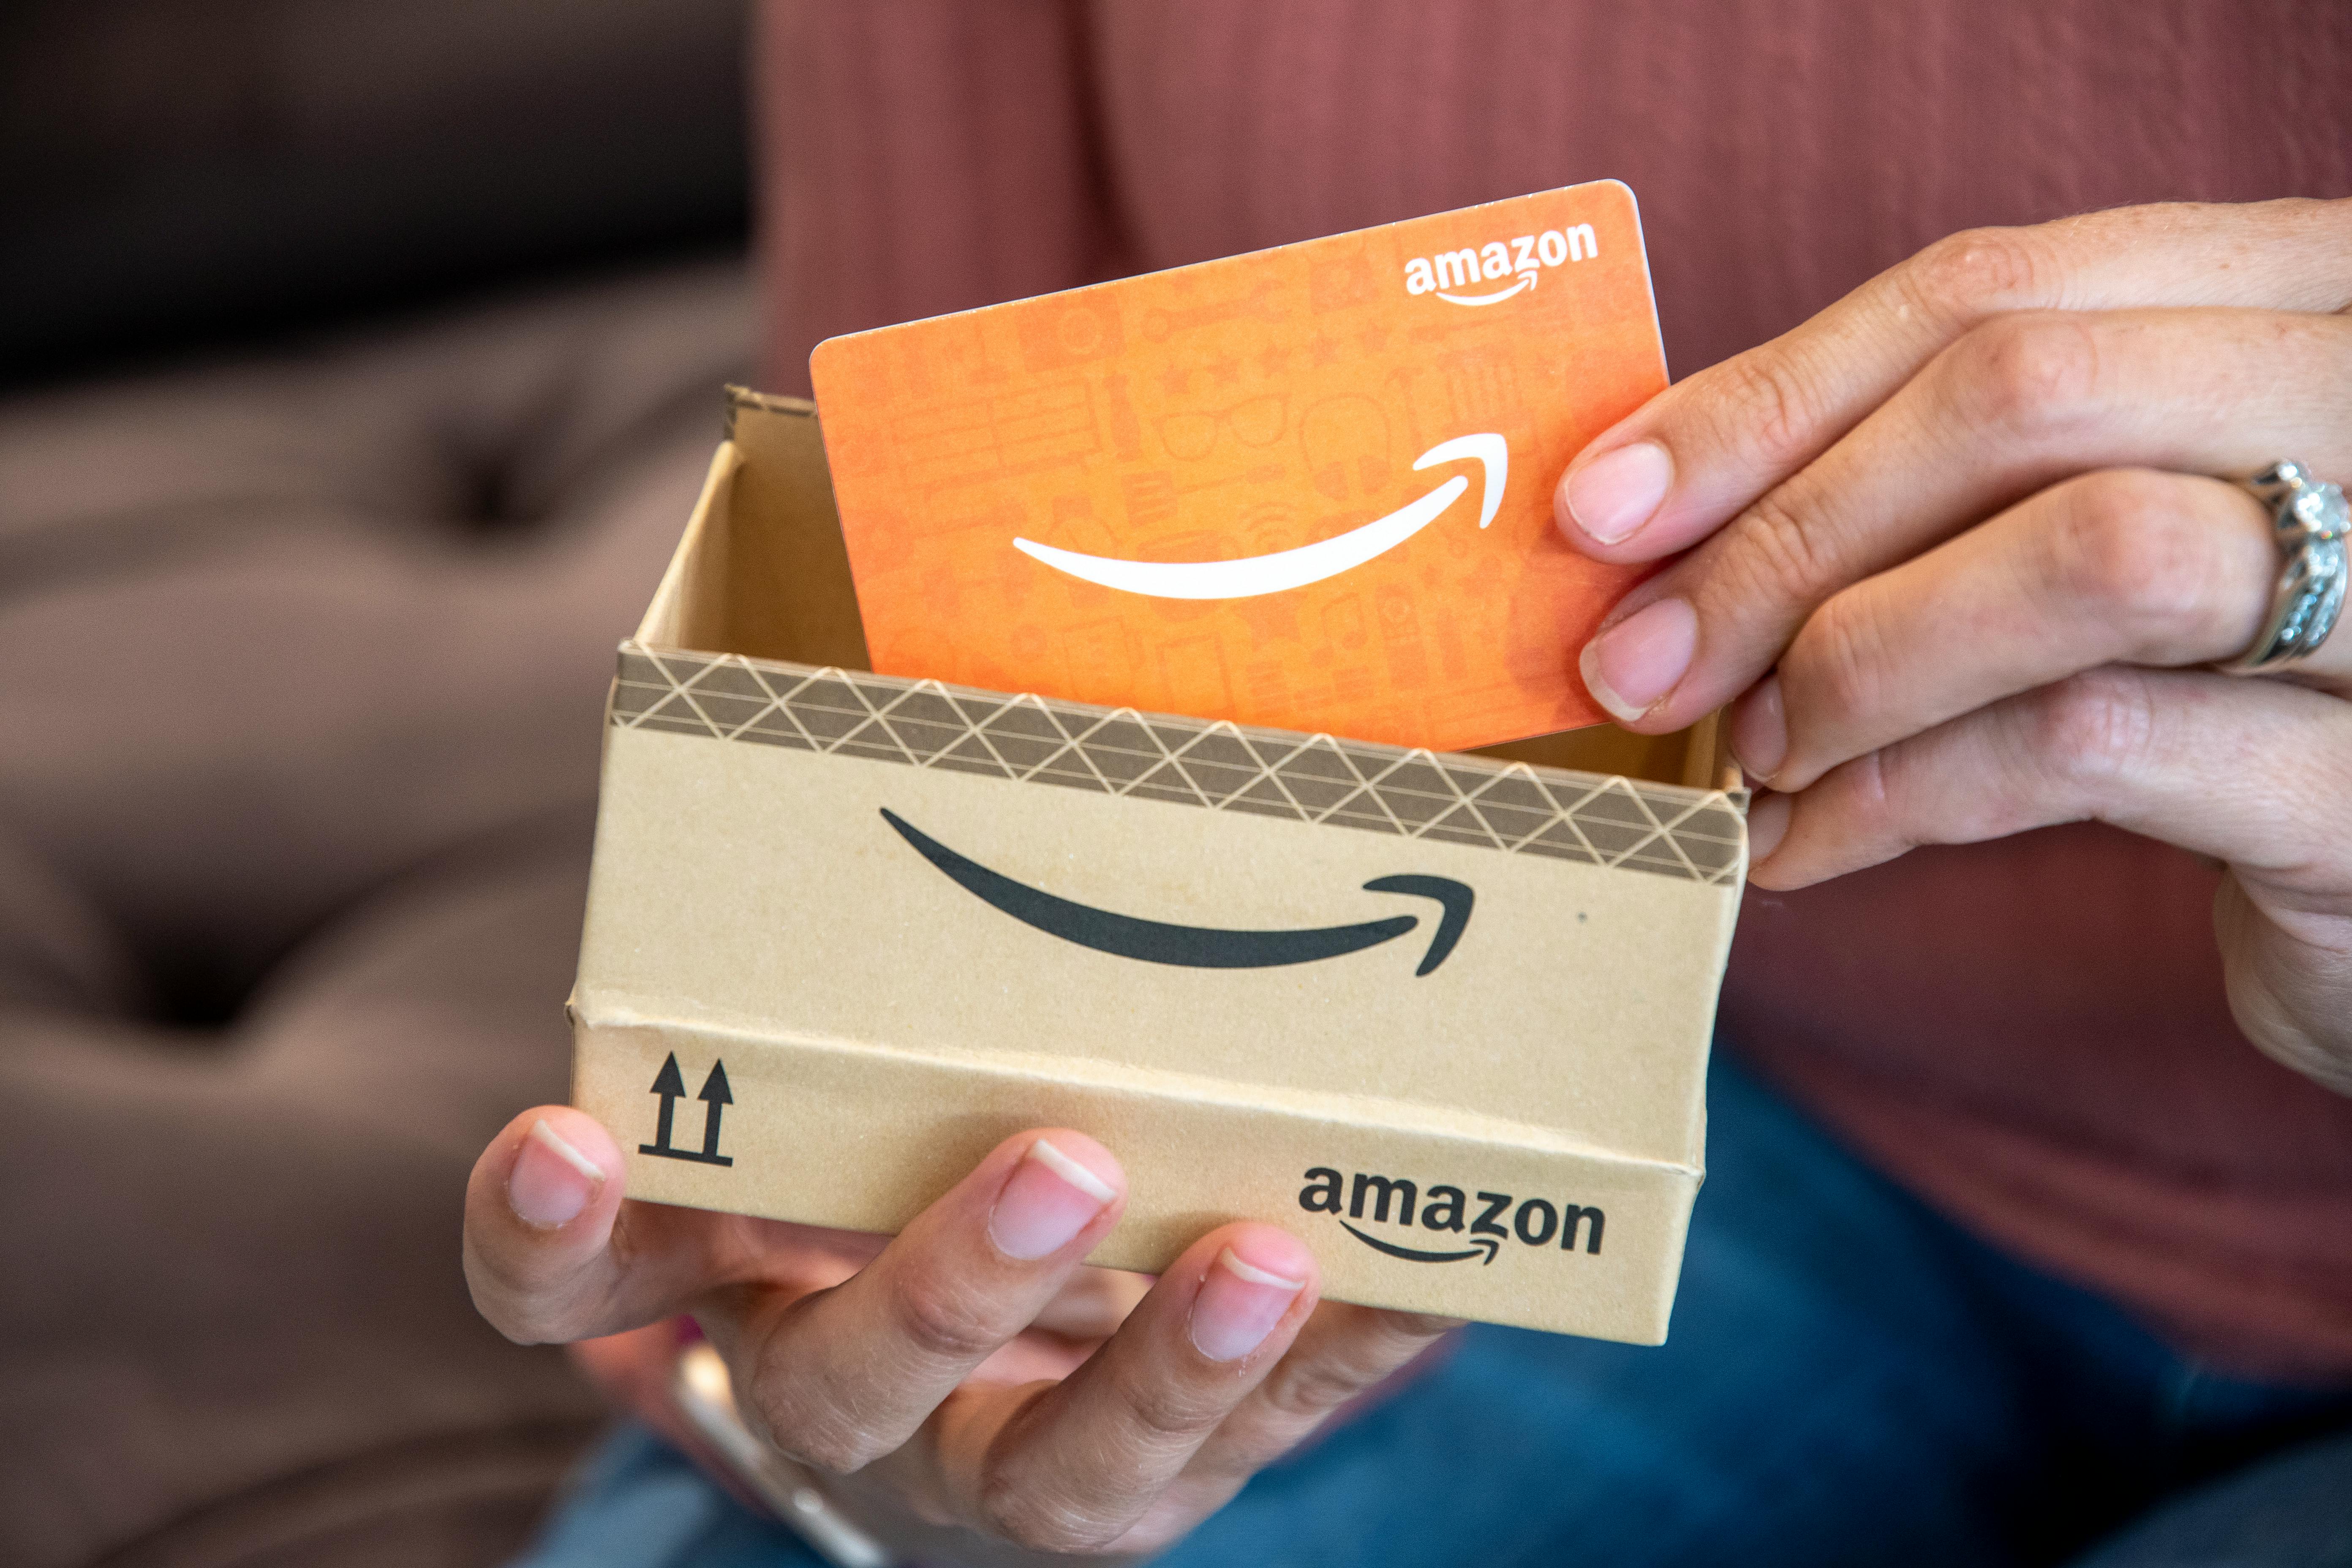 Where Amazon Gift Cards Are Sold?